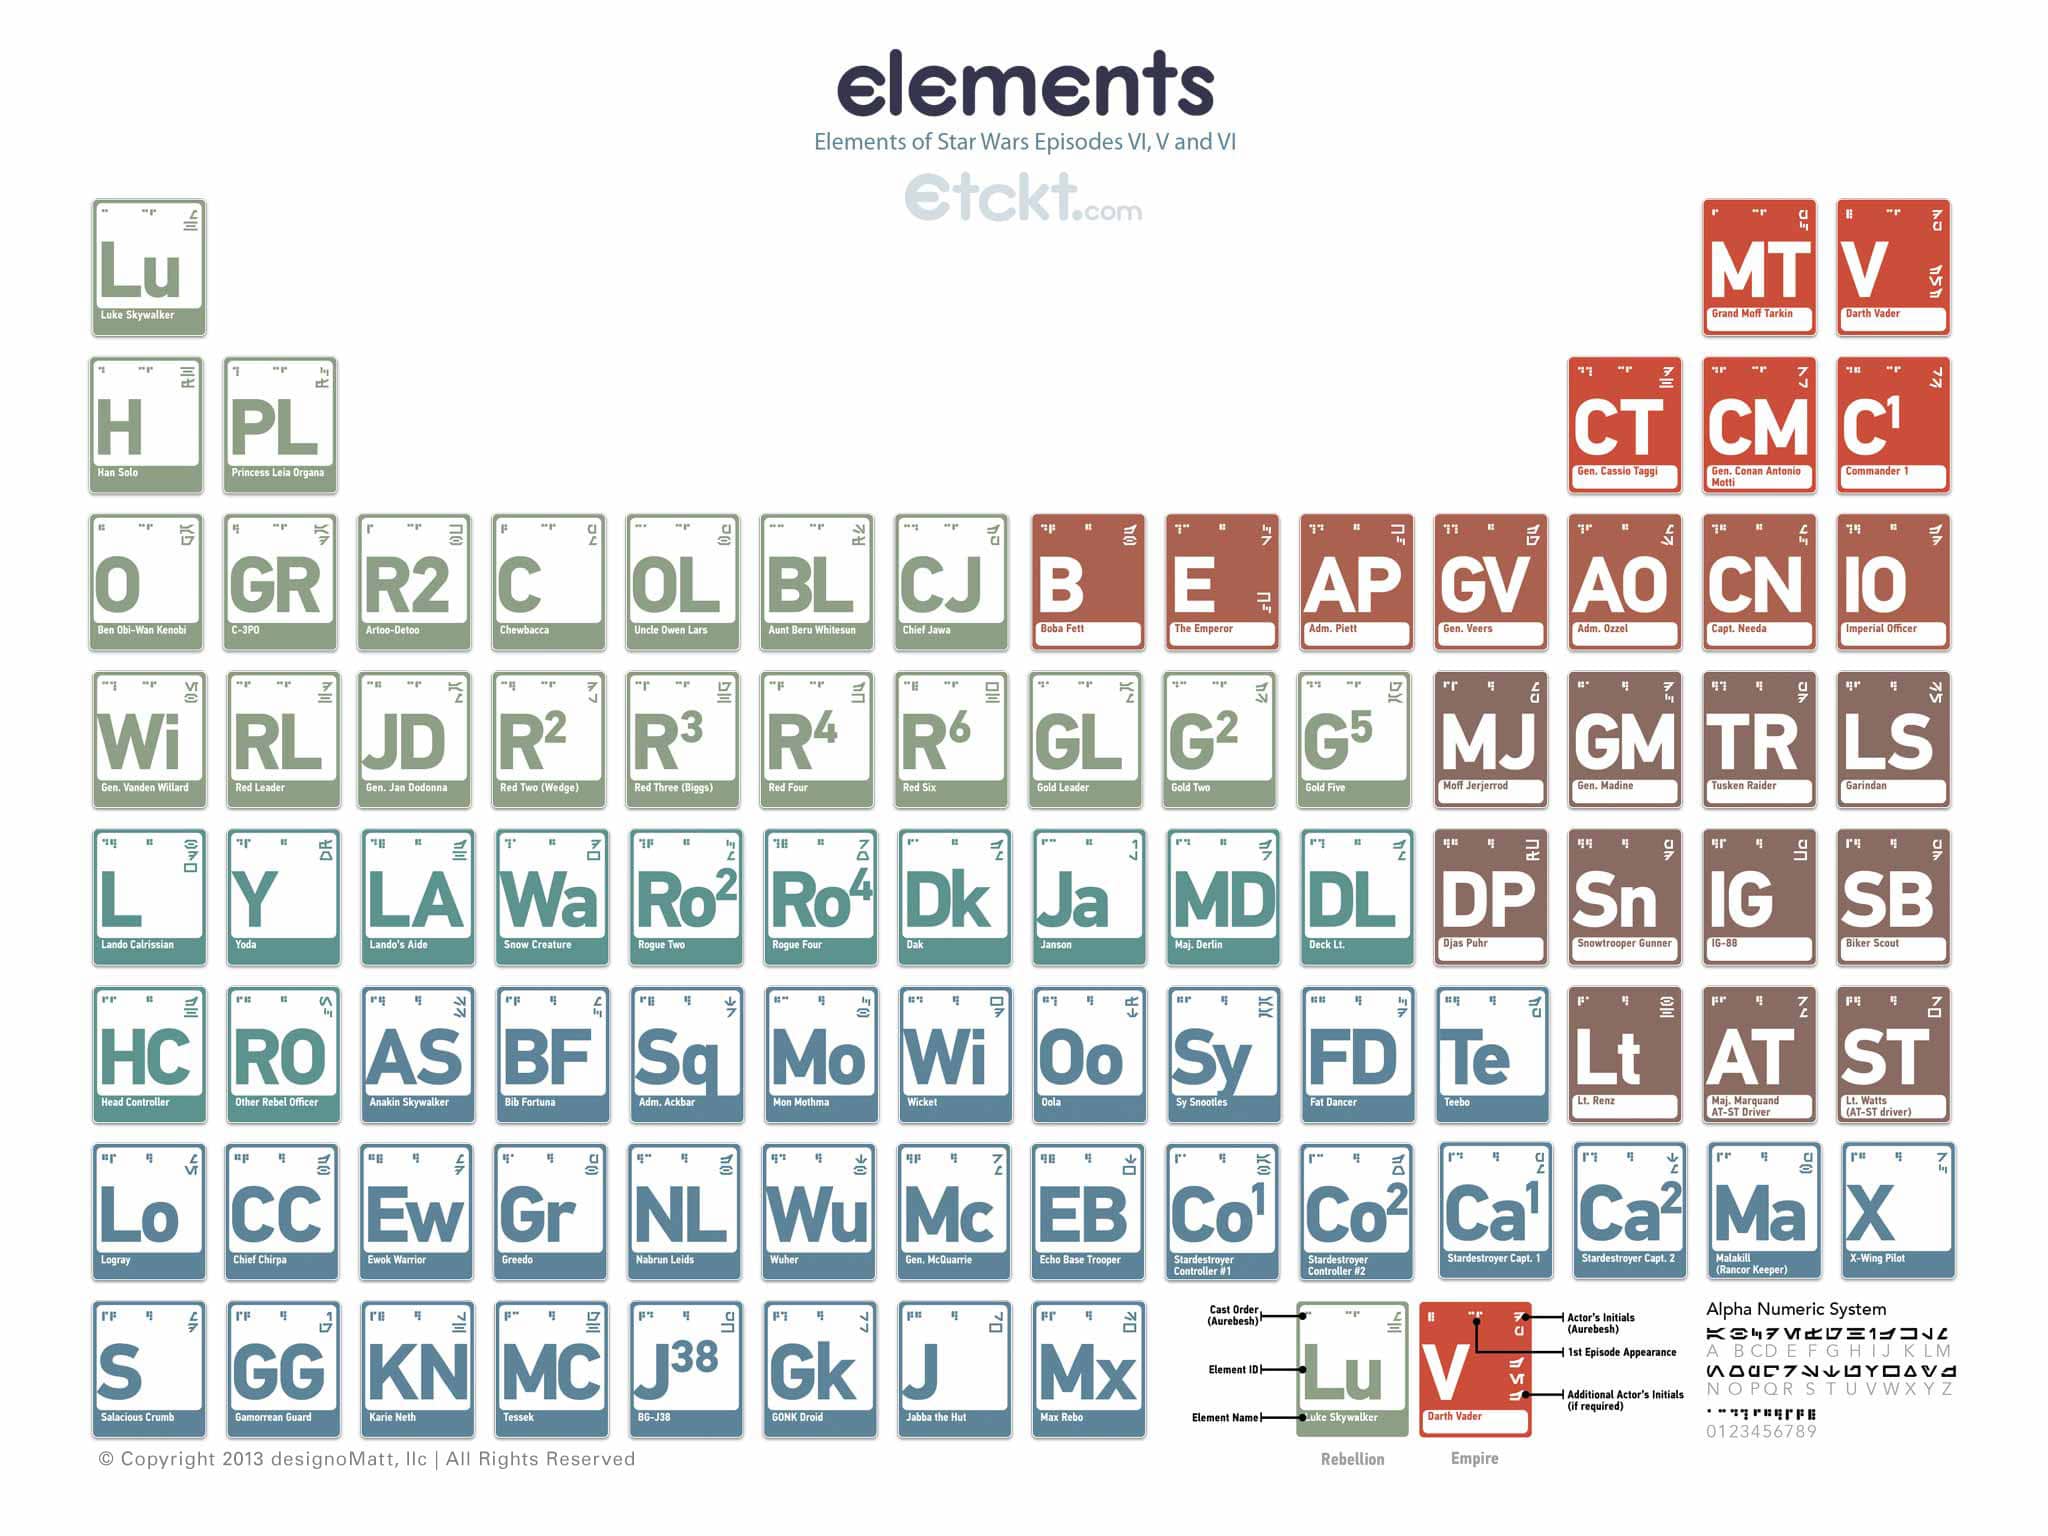 star-wars-episodes-periodic-table